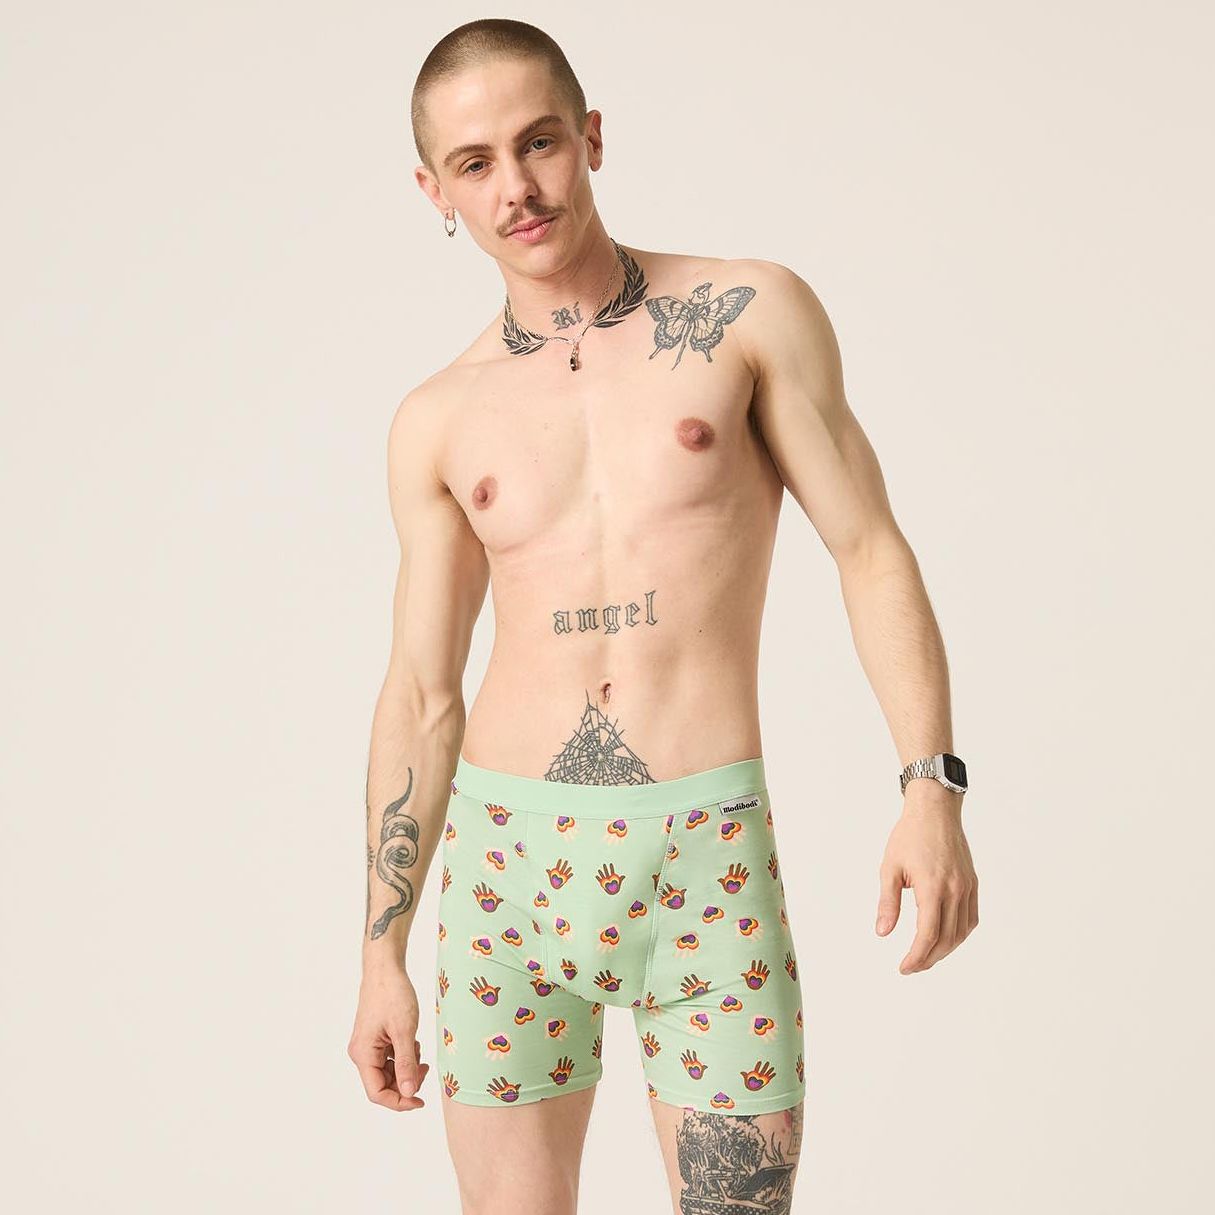 These Modibodi shorts may be the most comfortable underwear you'll ever own